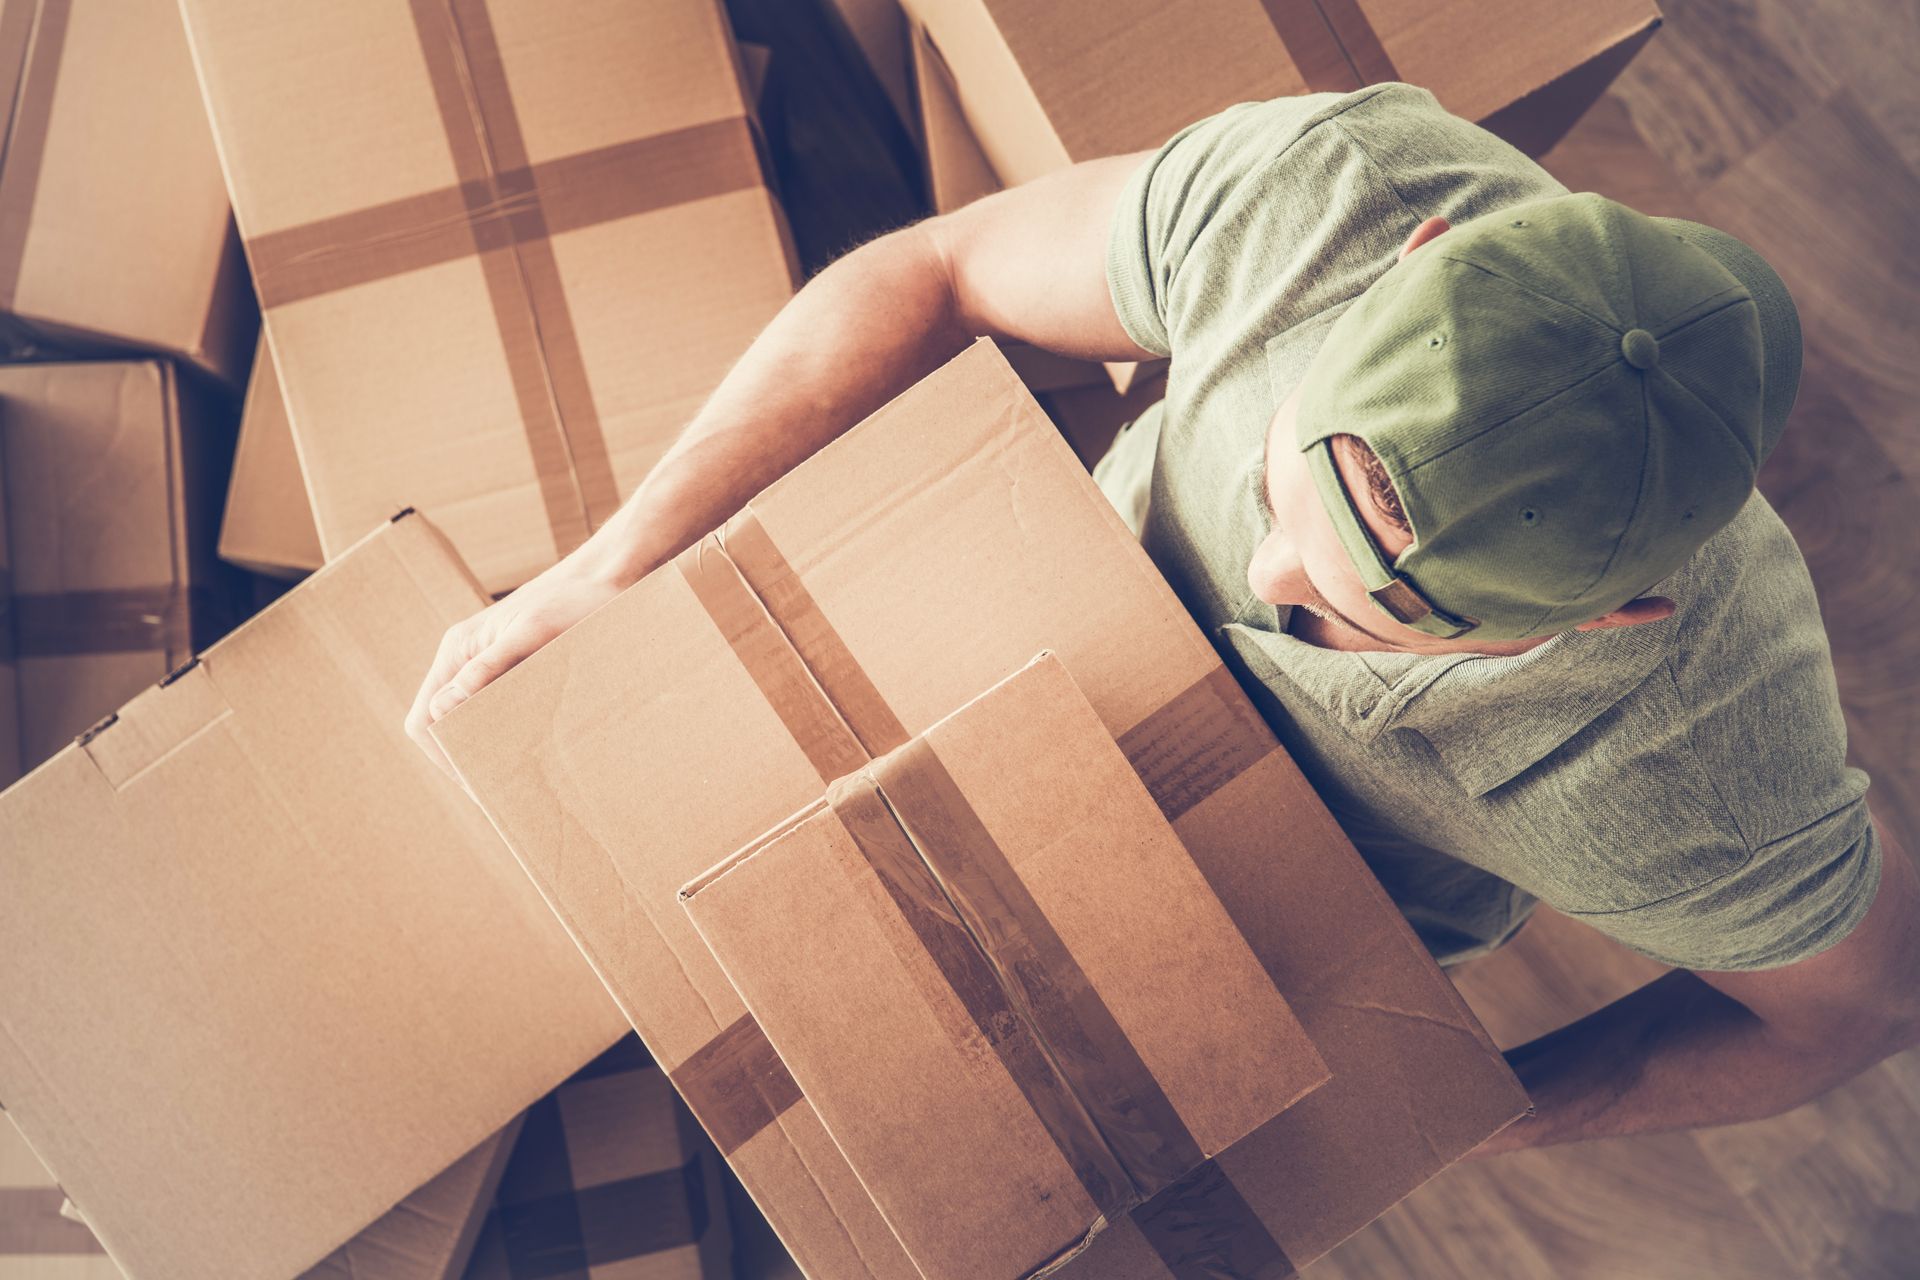 A man carefully carries a moving box, maintaining a sturdy grip as he navigates through a space.